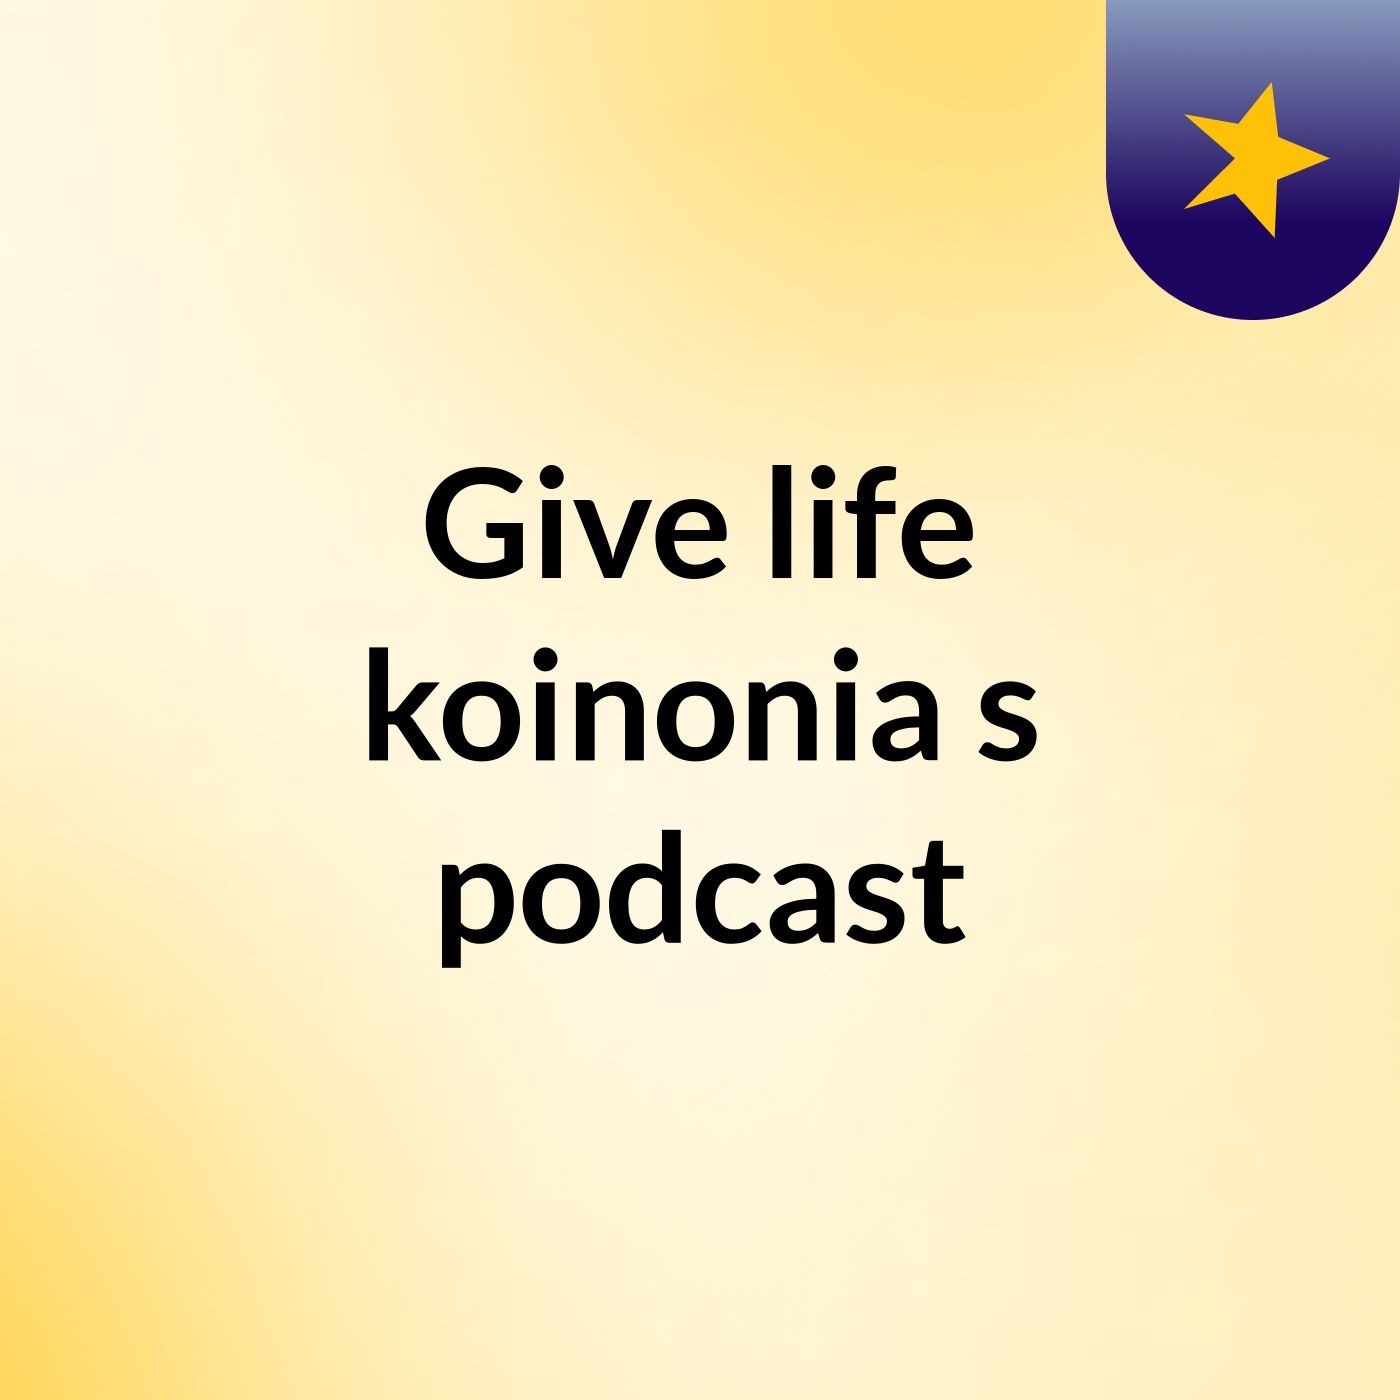 Episode 1 - Give life koinonia's podcast